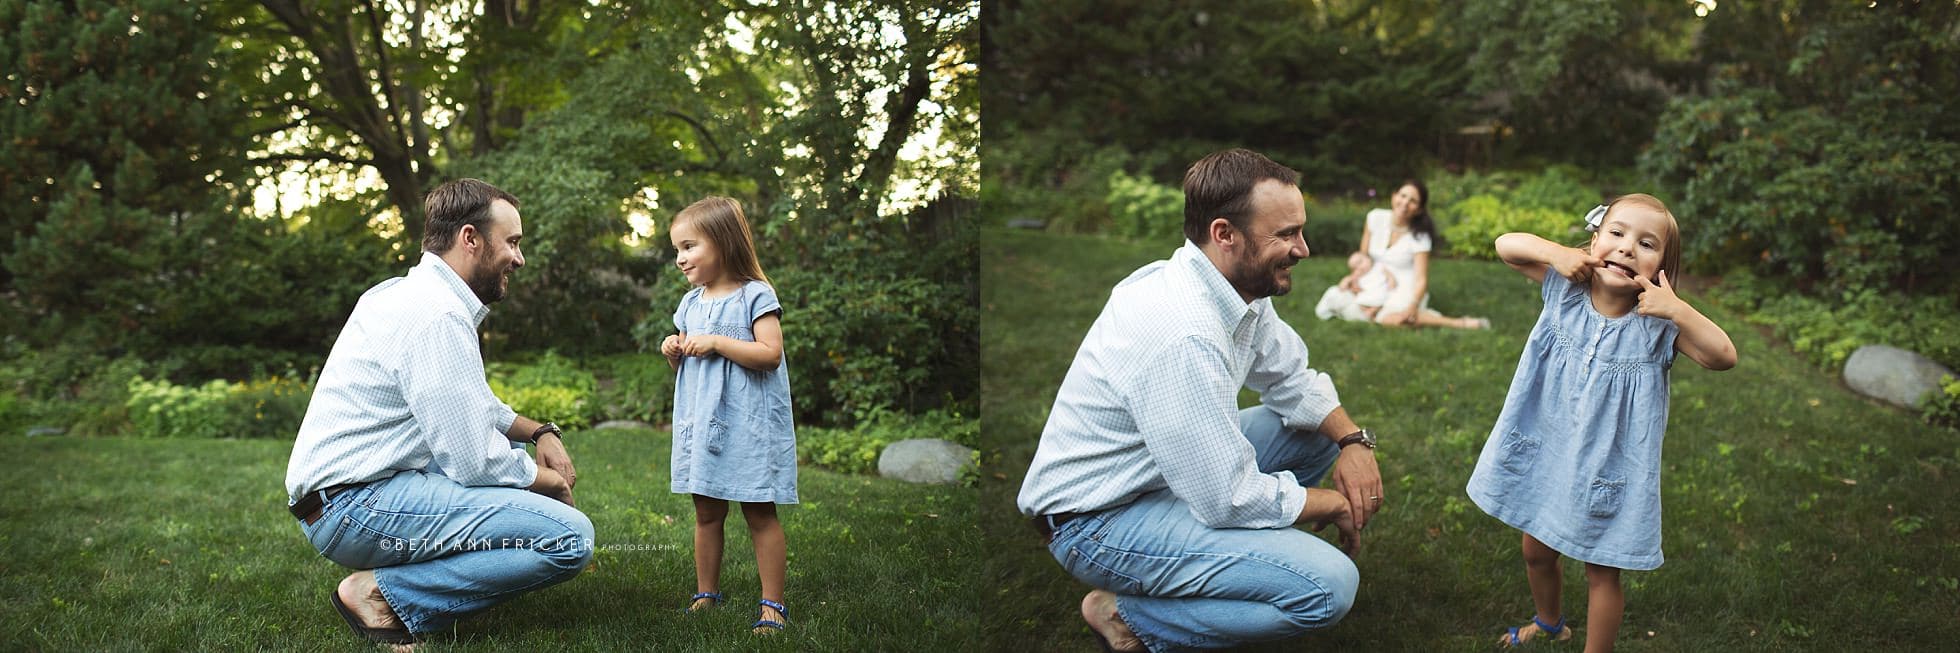 dad goofing wtih daughter Boston MA Family Photographer